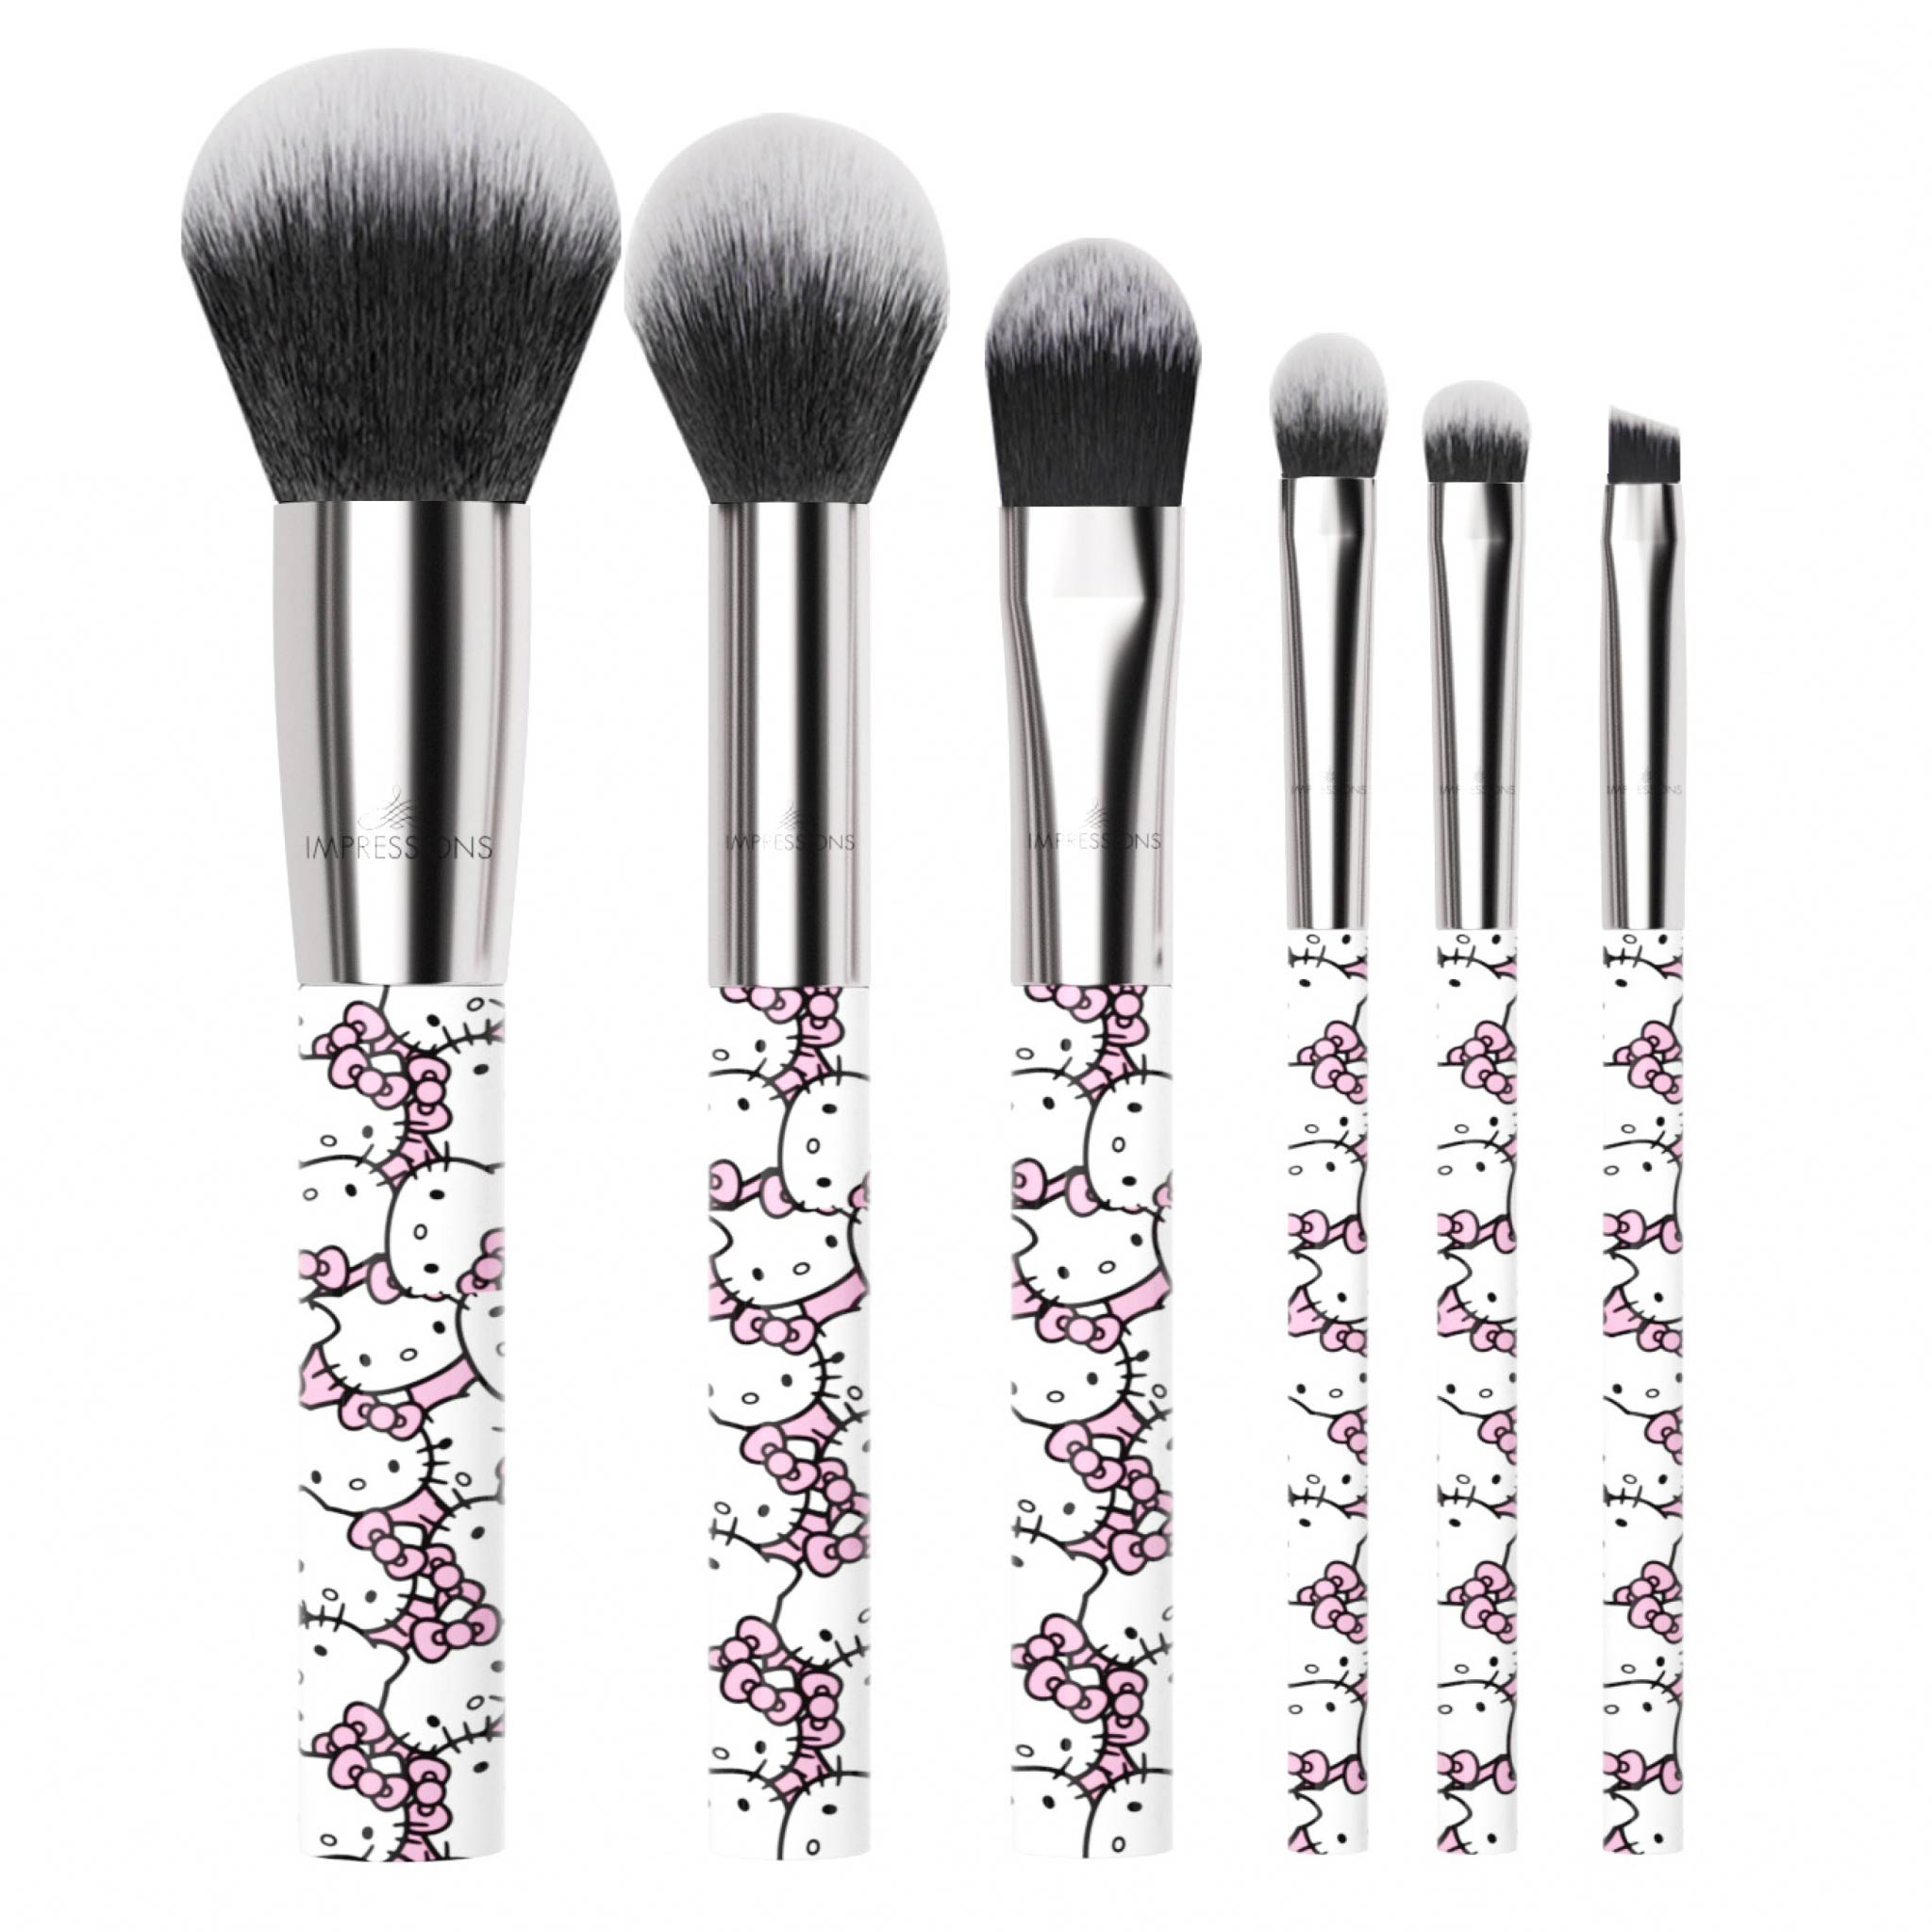 Impressions Vanity All Over Hello Kitty Print 6 Pcs Makeup Brush Set, Super Cute Soft Brushes for Foundation, Face Powder, Makeup Blending, Eye Shadow